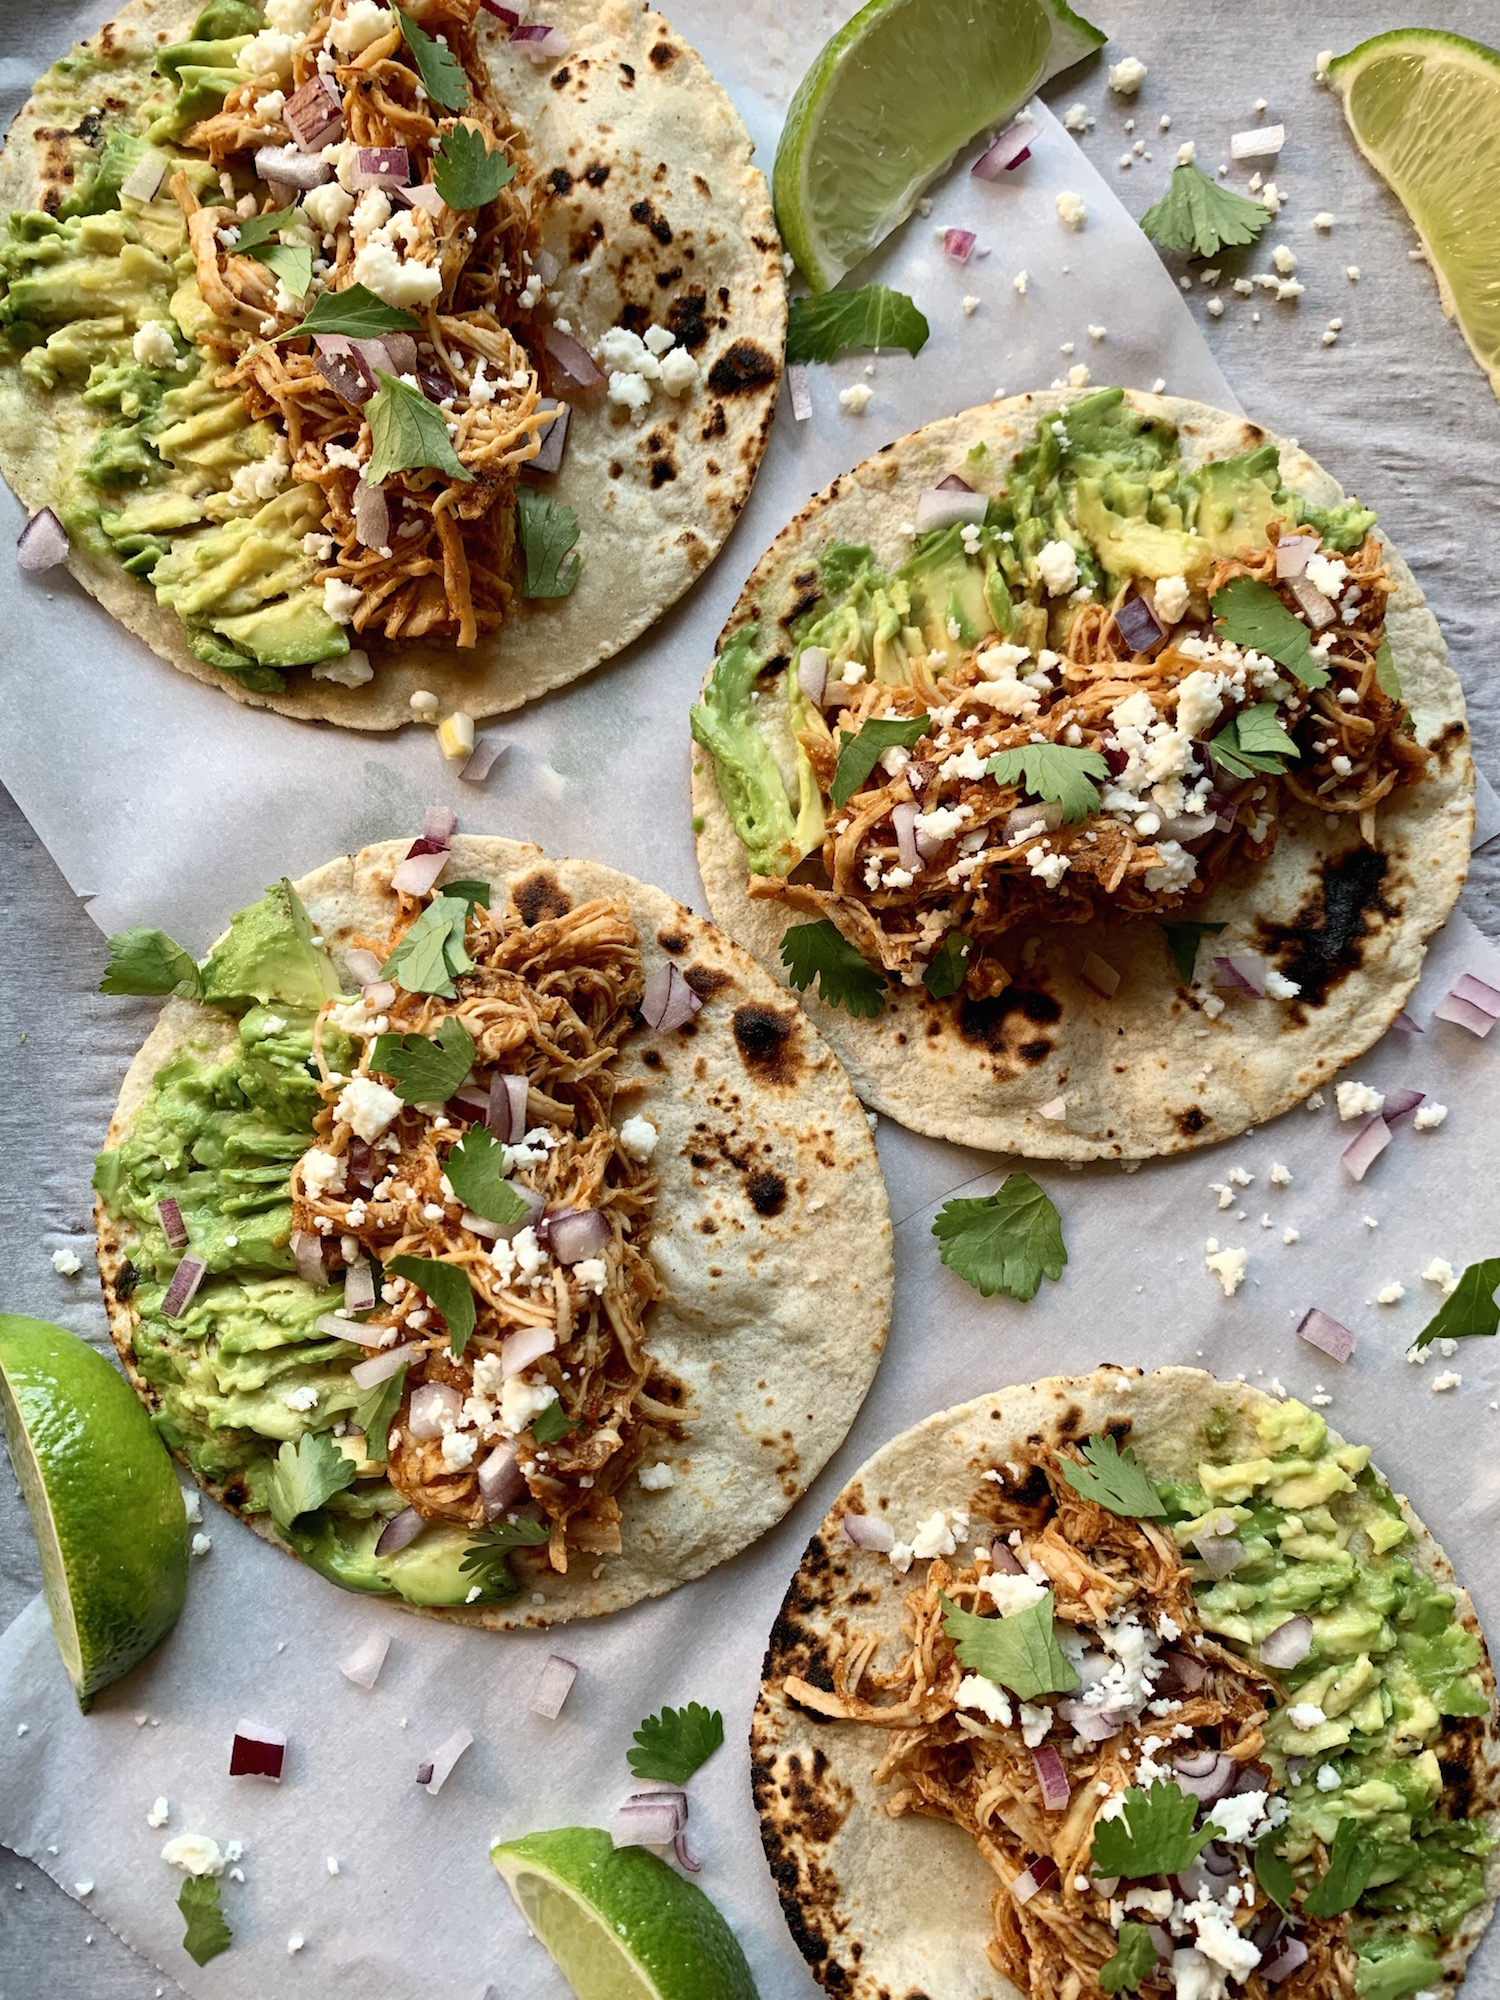 Soft tortillas open on parchment paper filled with chicken tinga, smashed avocado, queso fresco, diced onion and cilantro